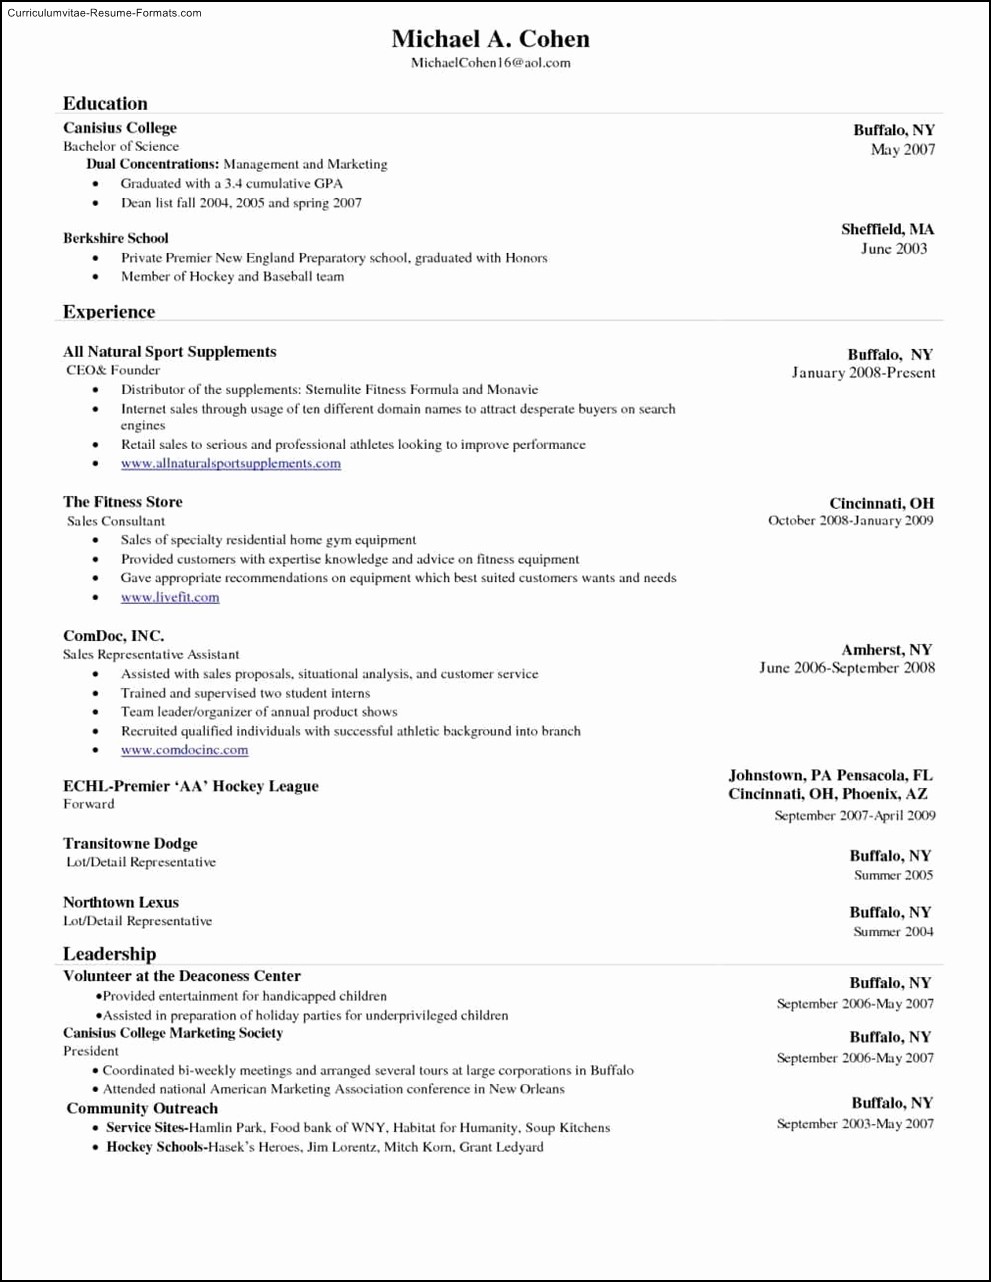 Download Ms Word Resume Template Beautiful Microsoft Word 2010 Resume Template Download Free